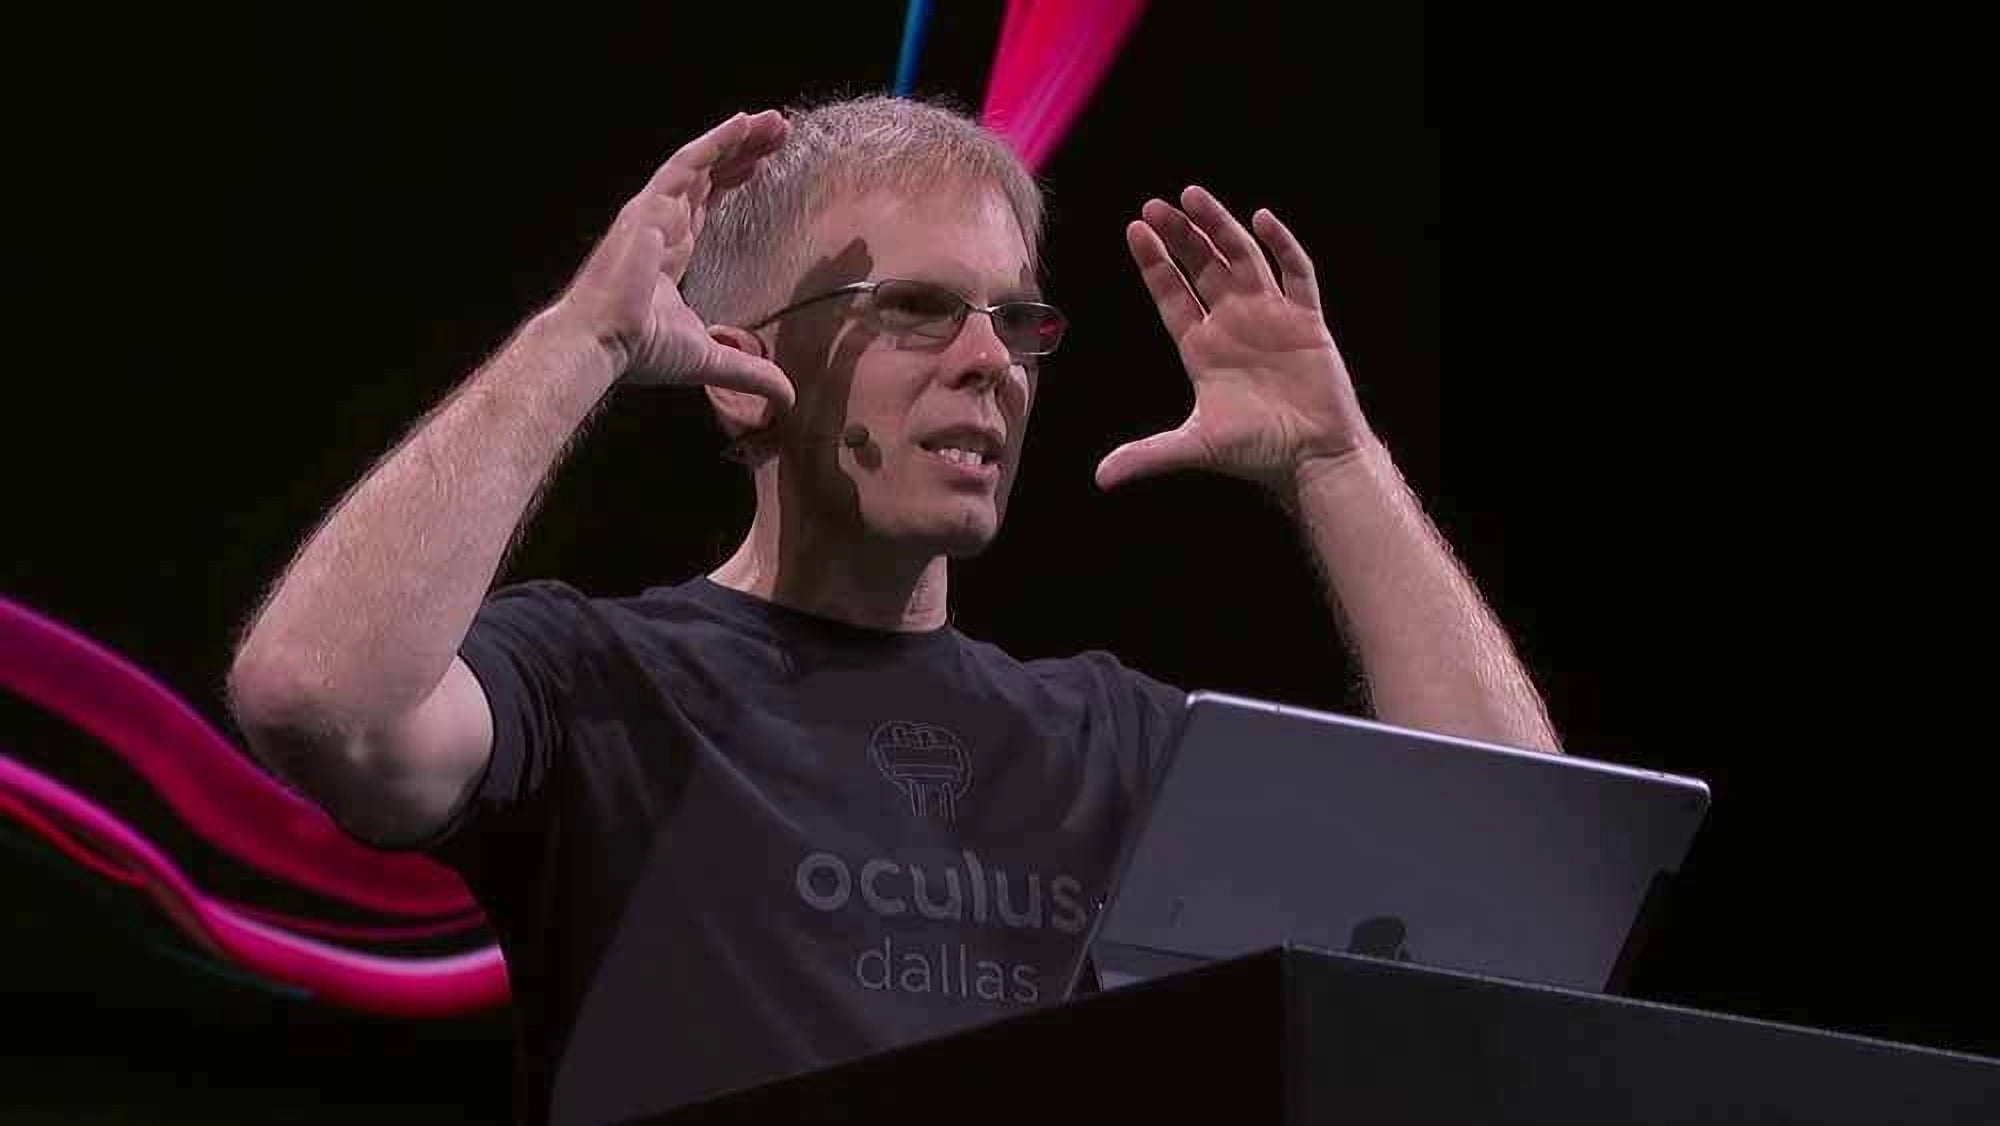 John Carmack offers advice to developers worried about losing jobs to AI